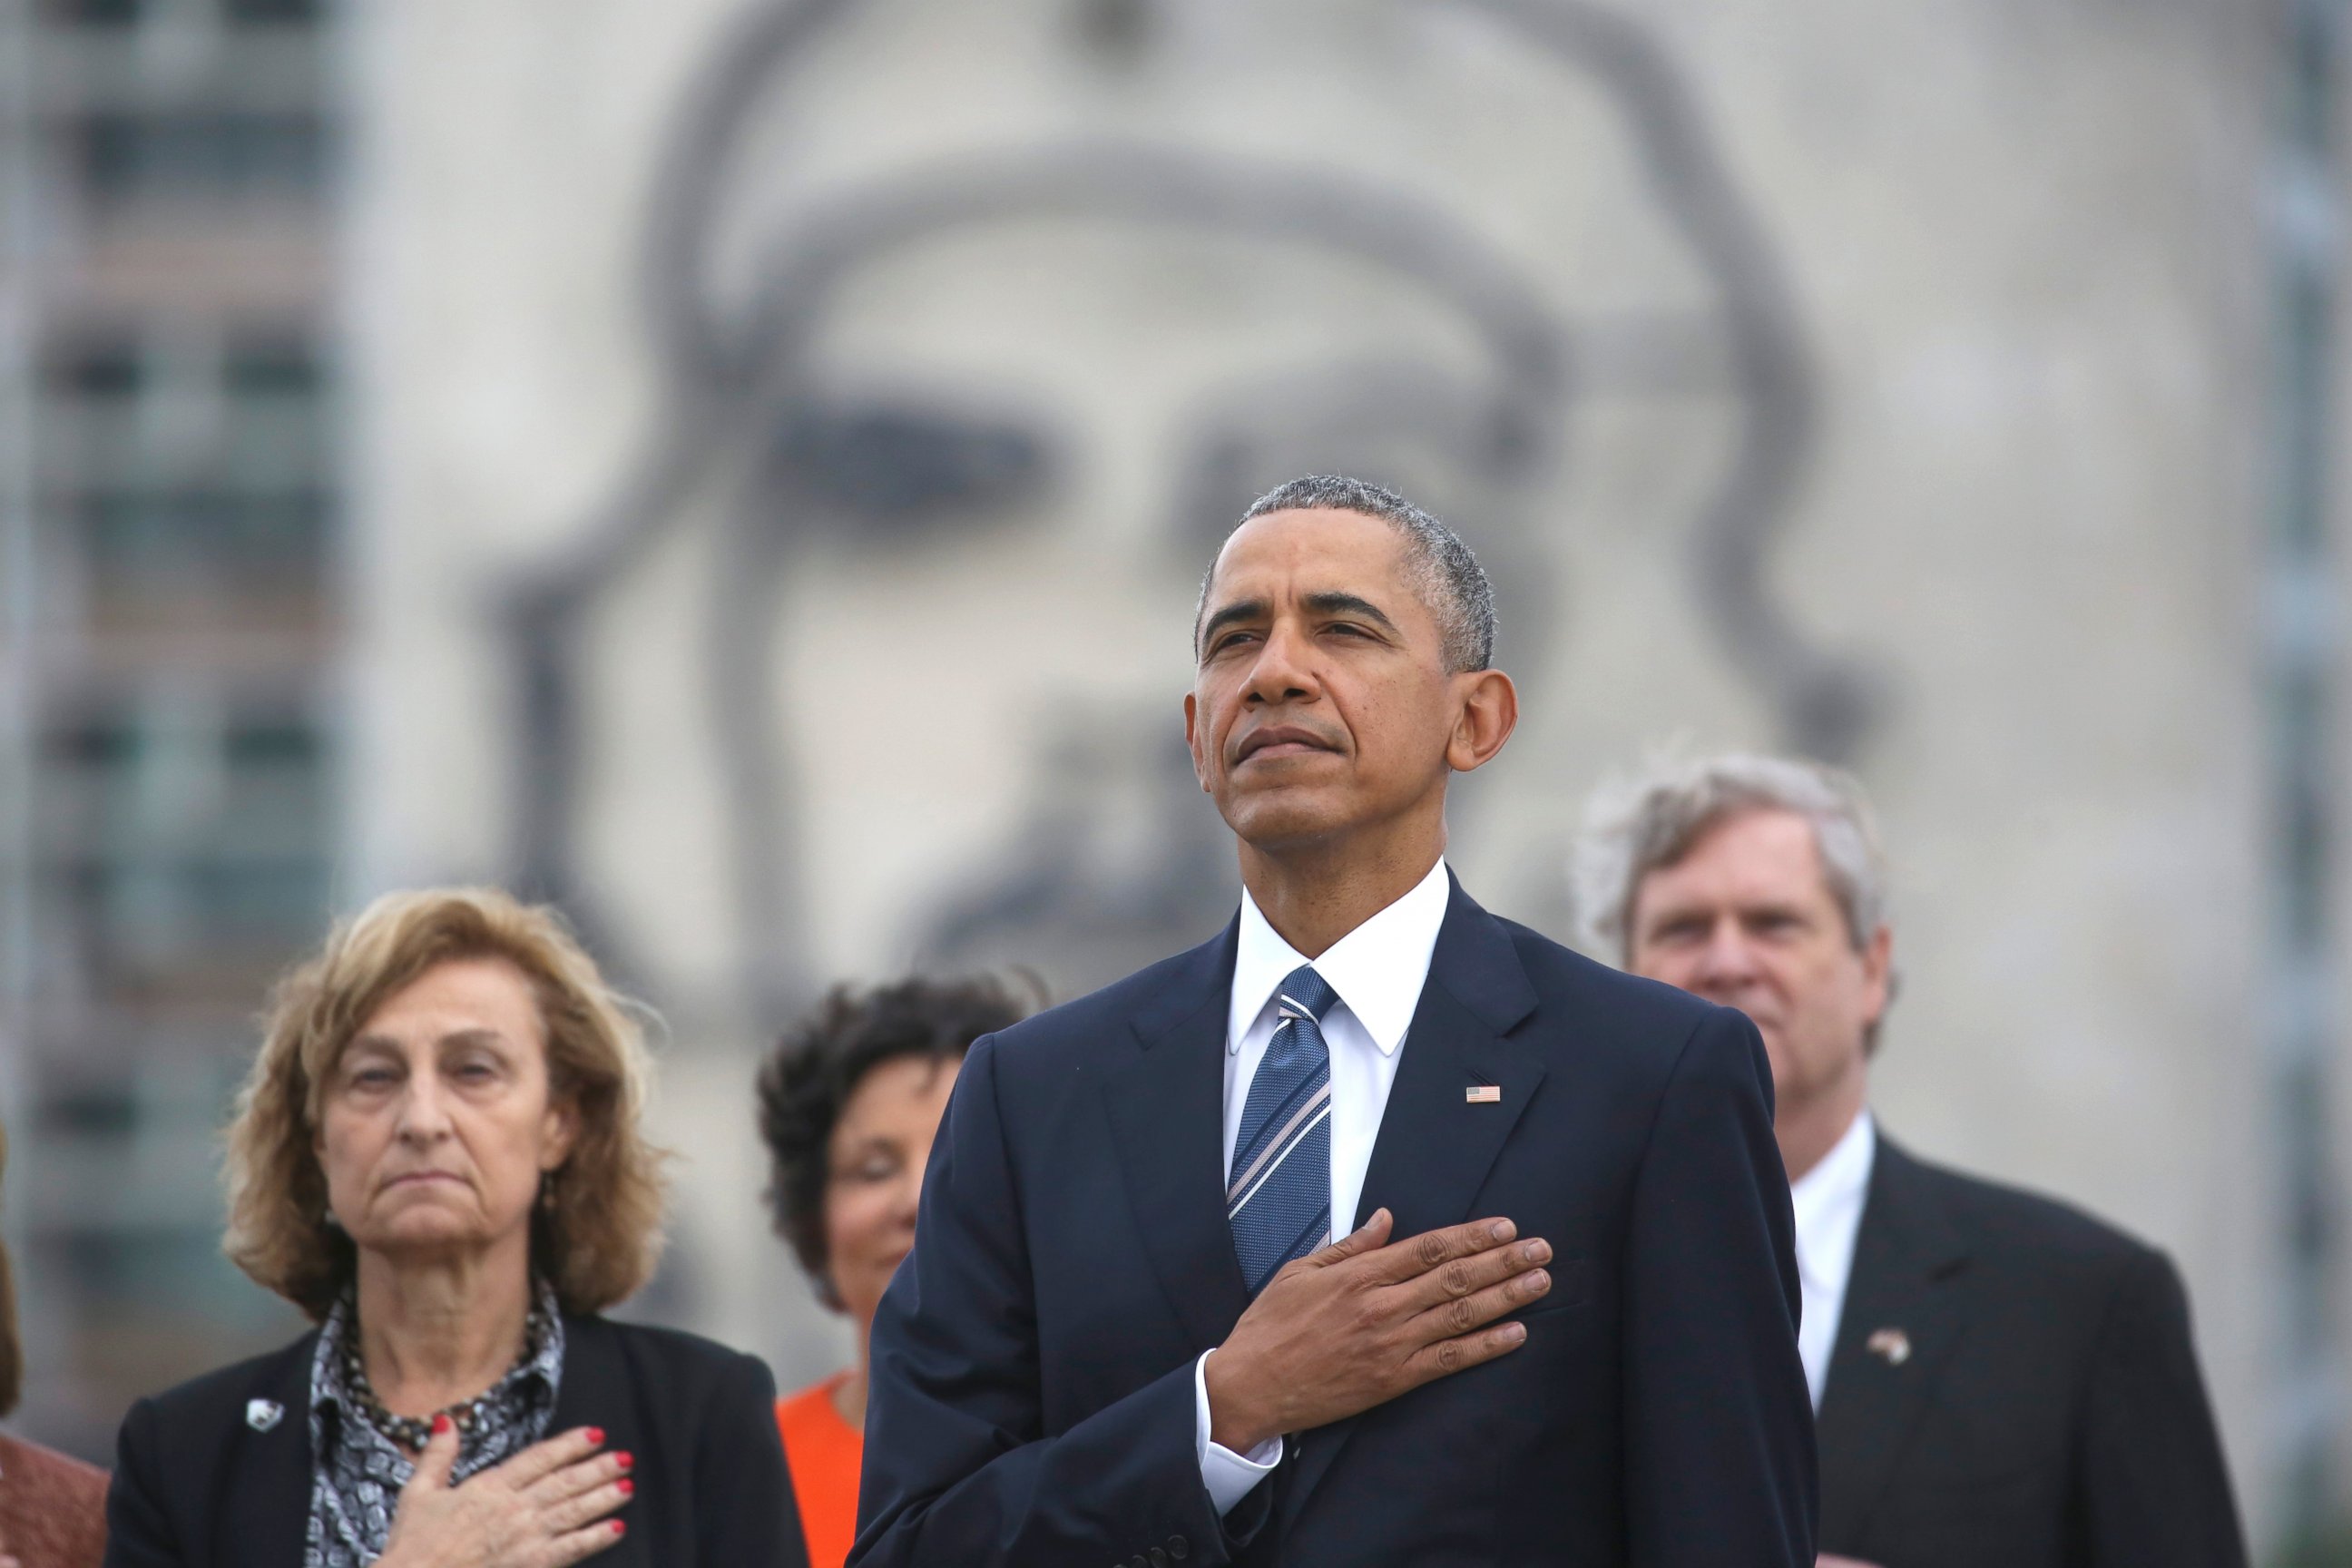 PHOTO: President Barack Obama listens to the U.S. national anthem during a ceremony at the Jose Marti Monument in Havana, Cuba, March 21, 2016.